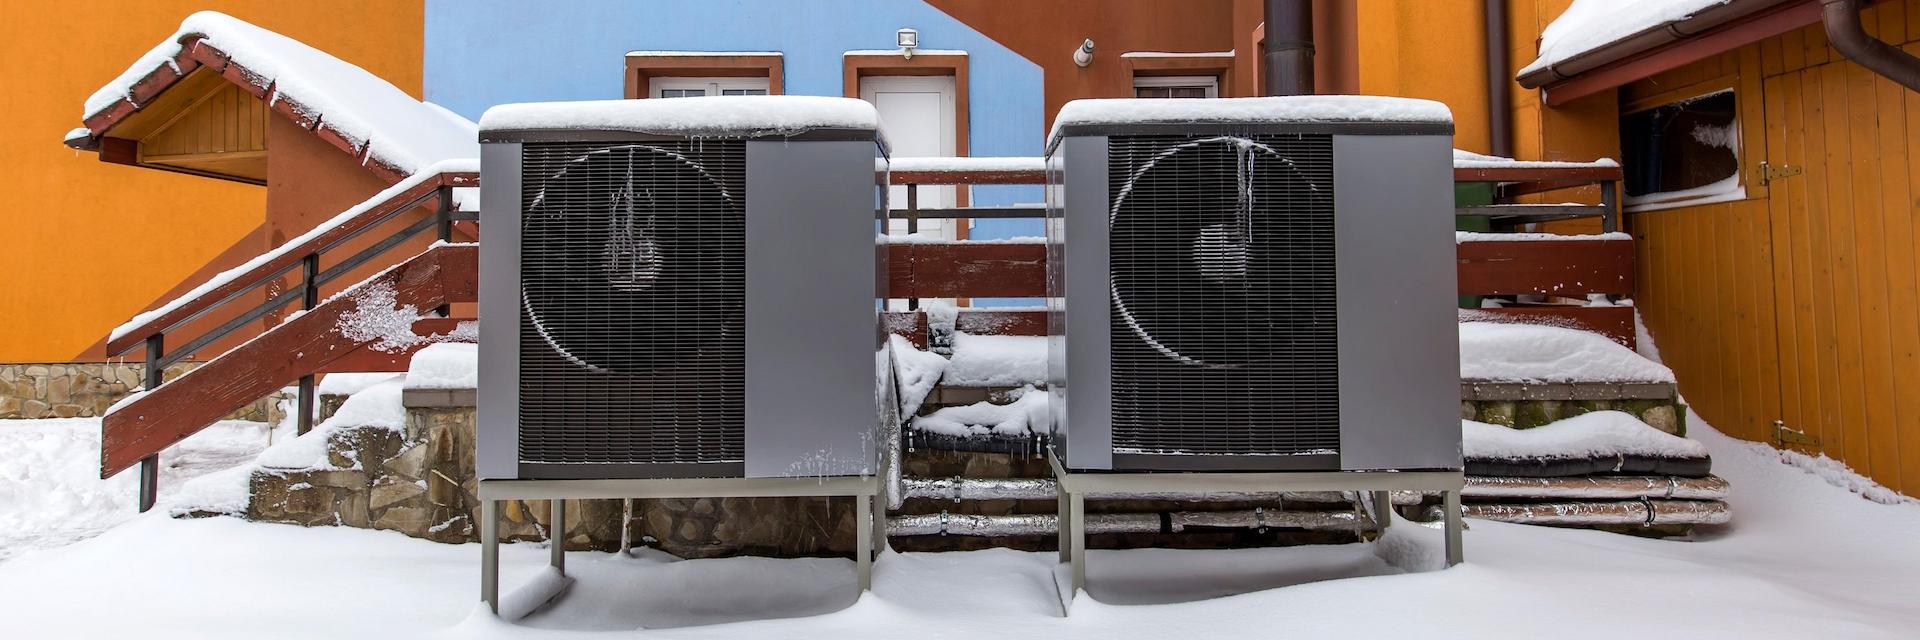 Two residential modern heat pumps buried in snow